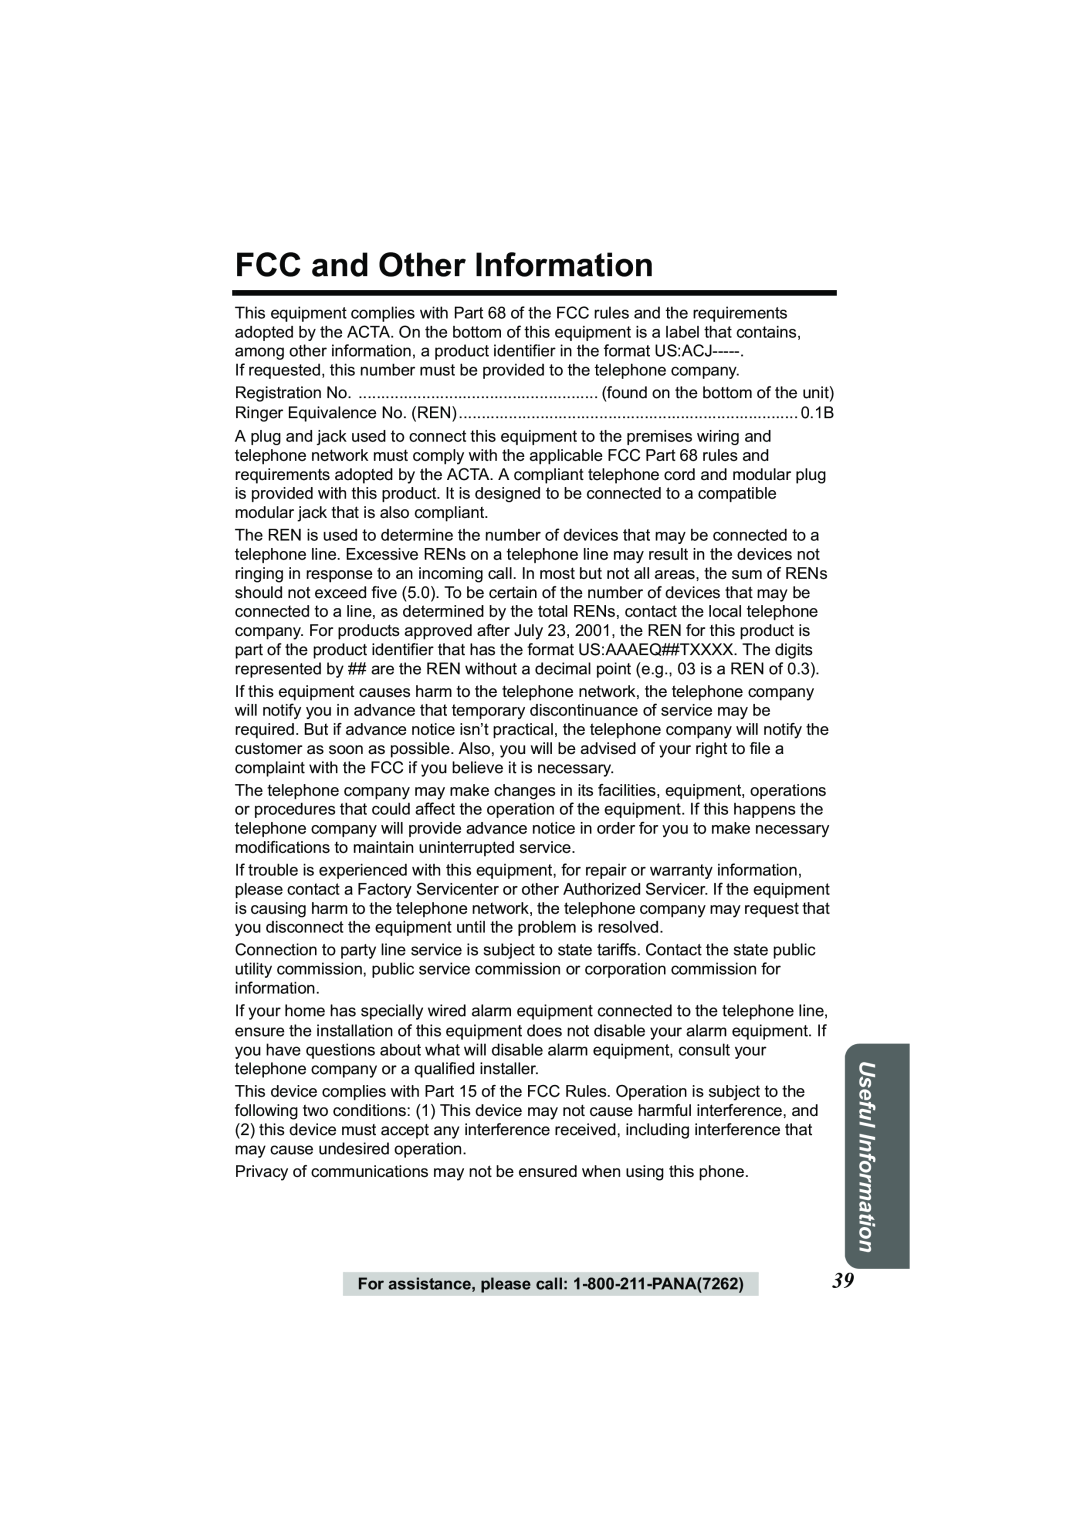 Panasonic Acr14CF.tmp manual FCC and Other Information, Useful Information 